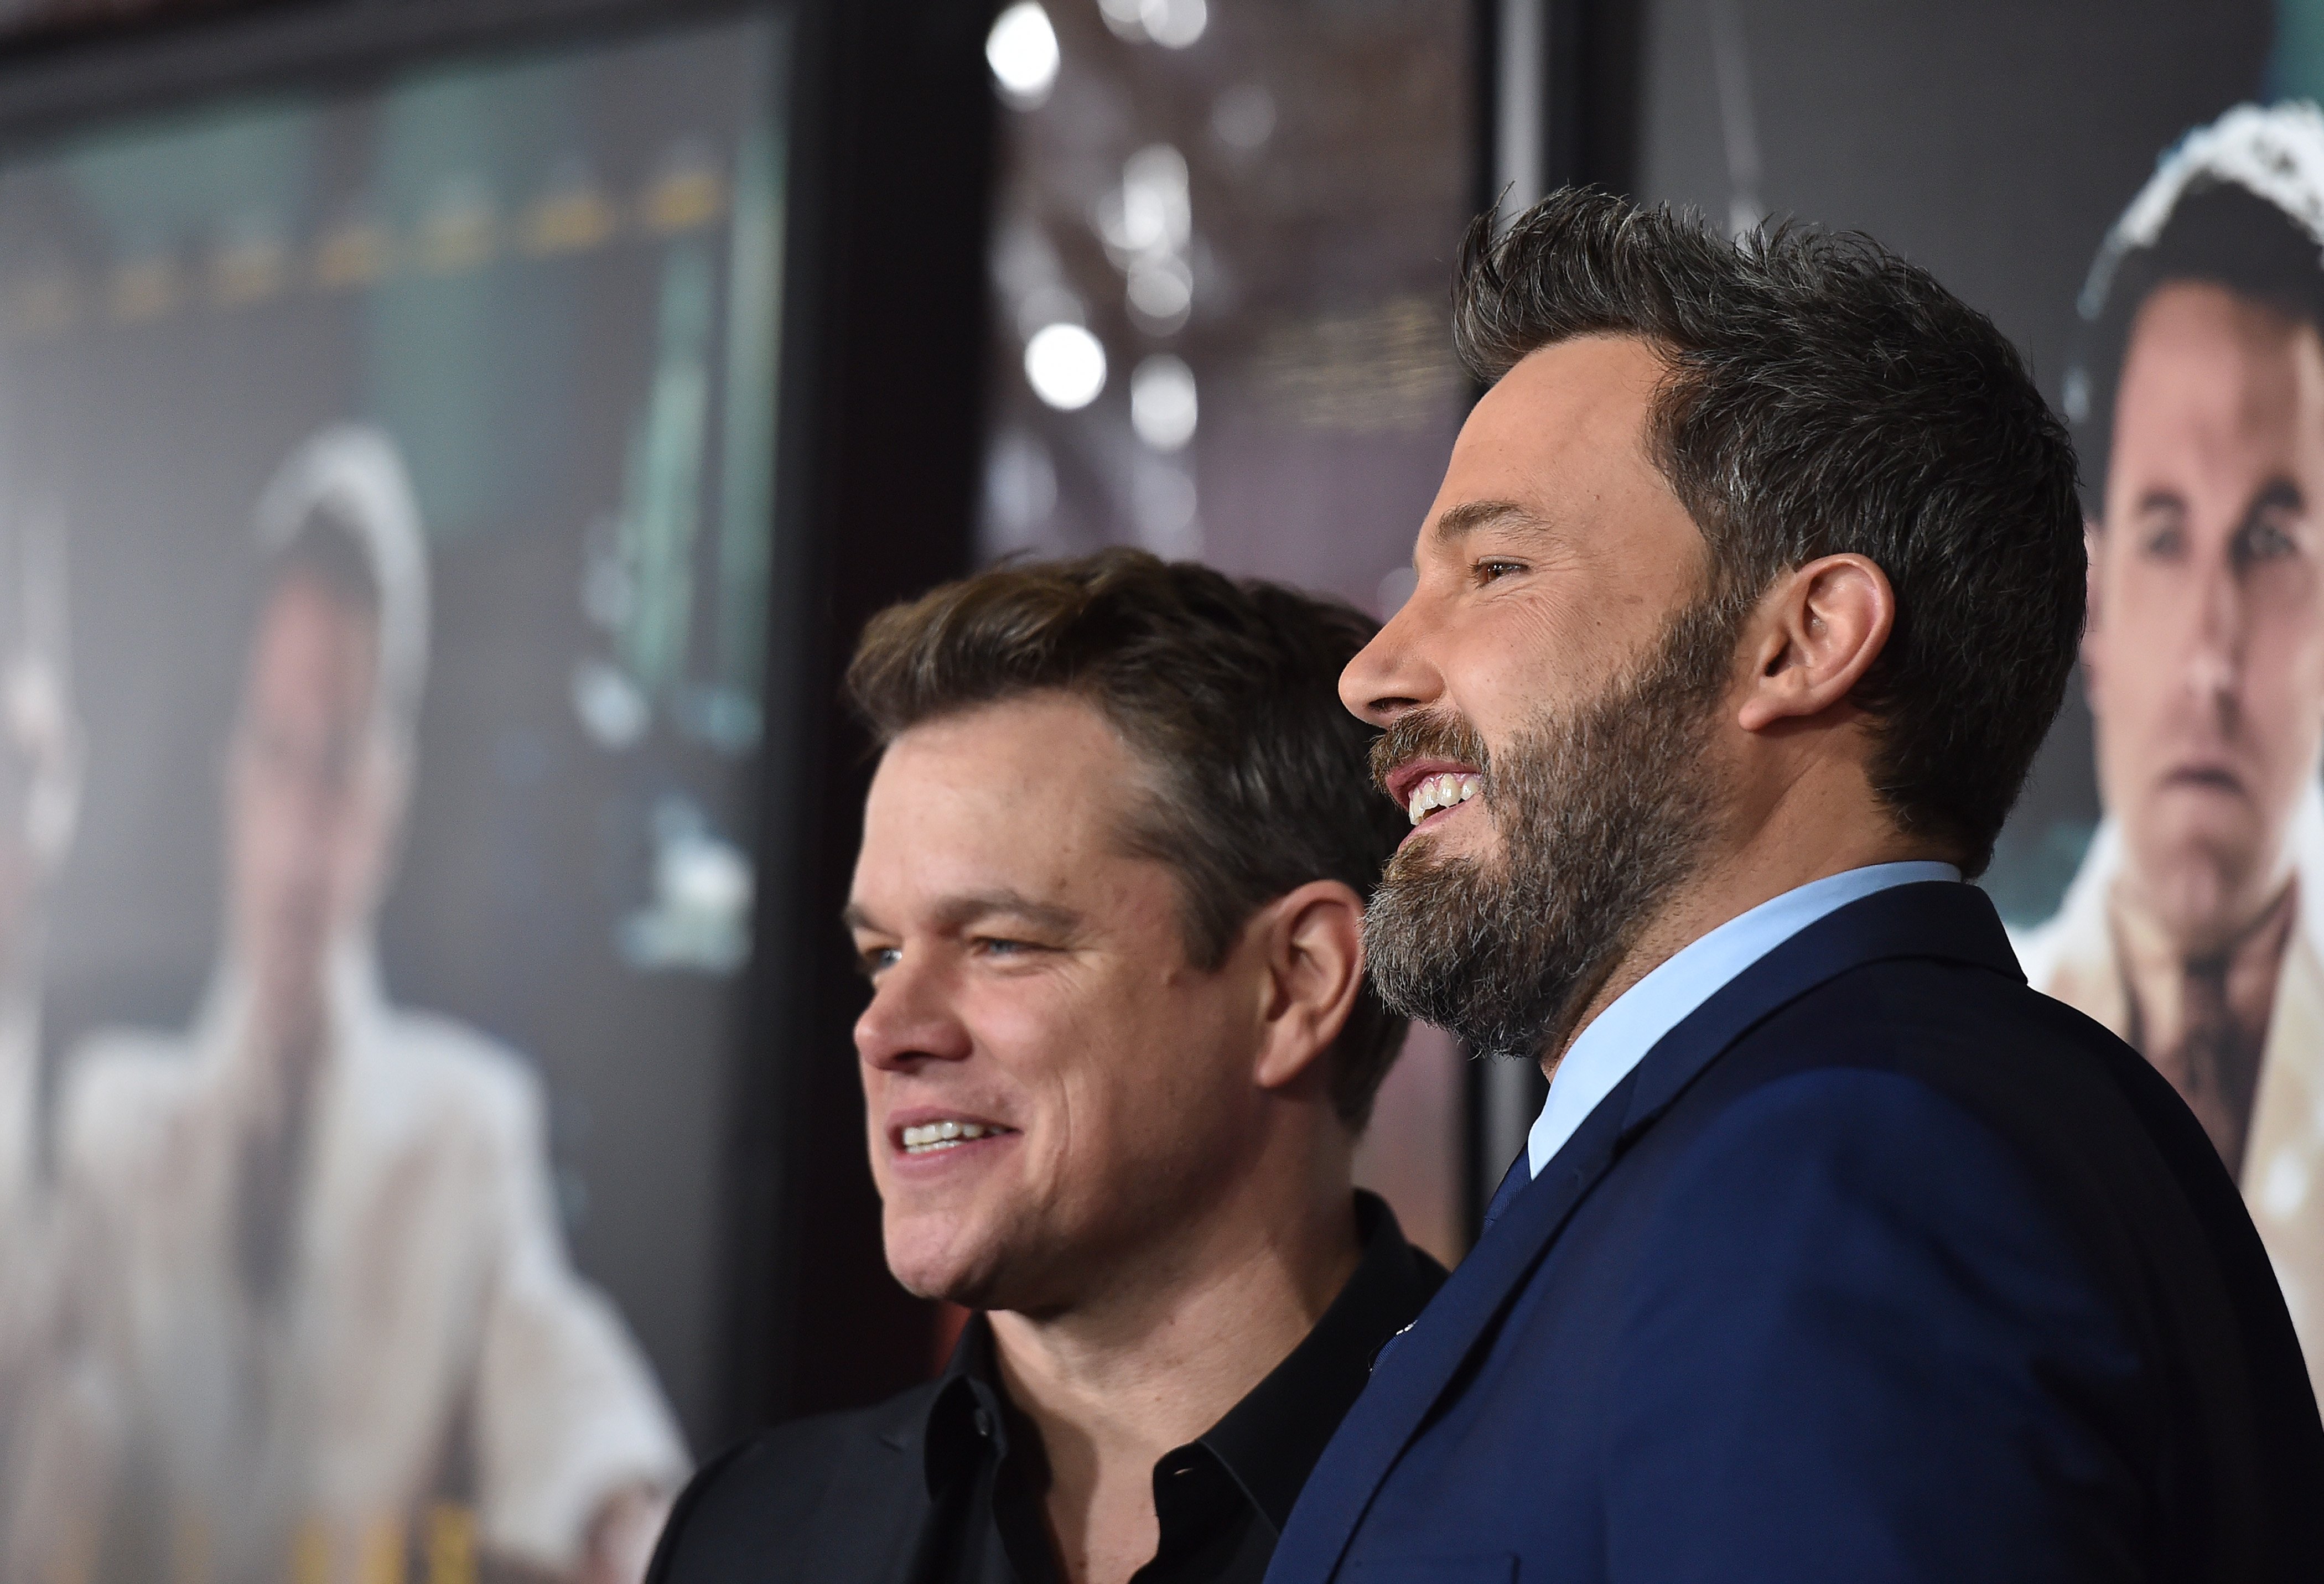 Matt Damon and Ben Affleck at the premiere of 'Live By Night' at TCL Chinese Theatre in Hollywood, California | Photo: Axelle/Bauer-Griffin/FilmMagic via Getty Images